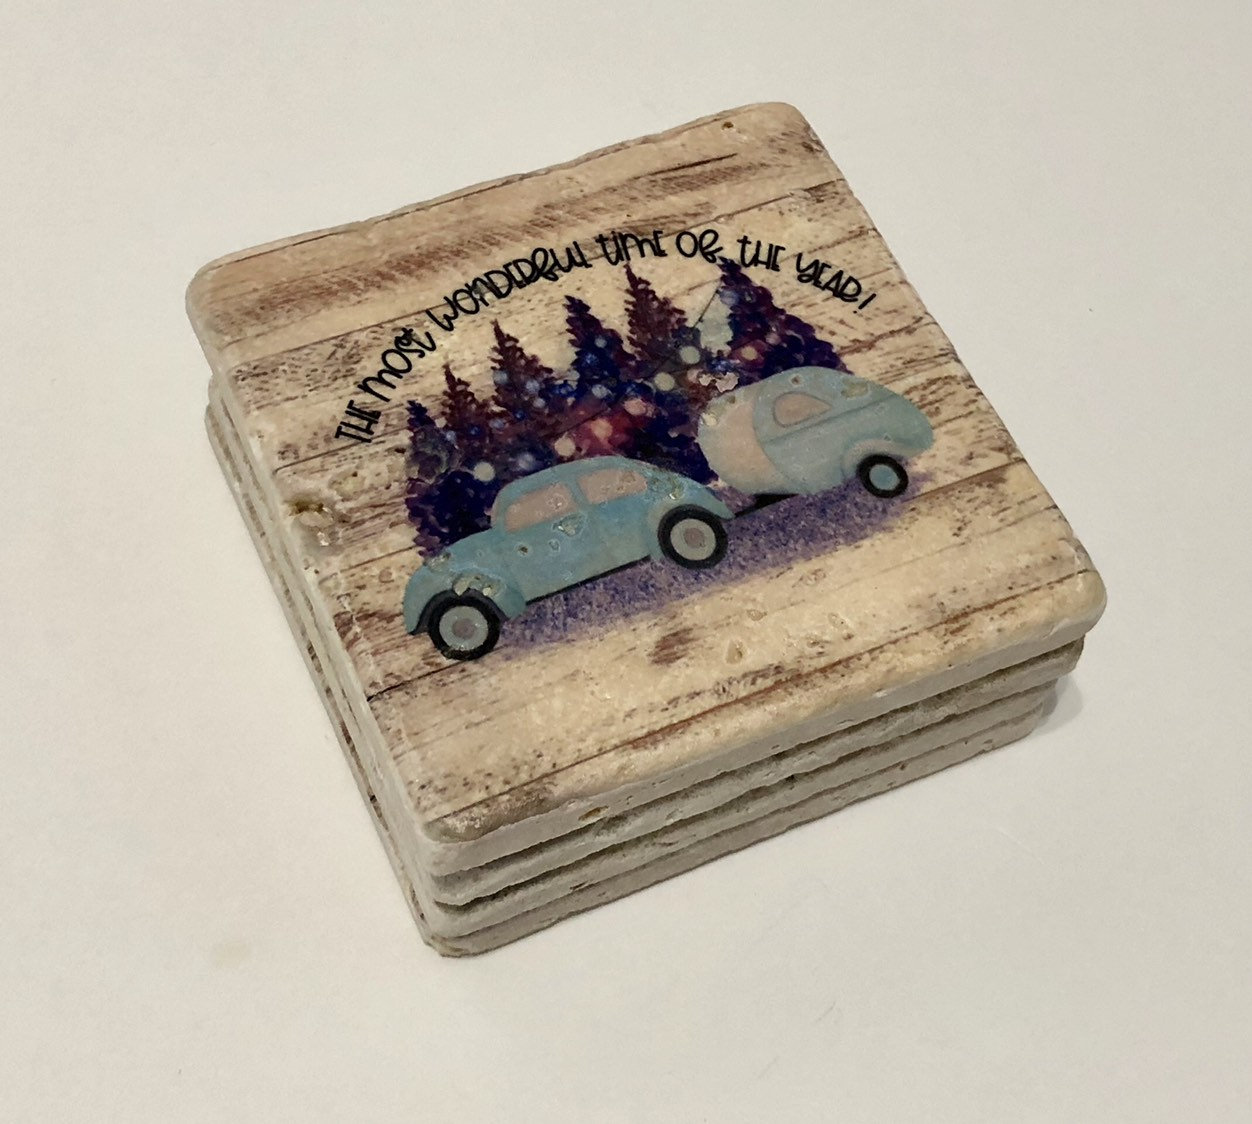 Blue Bug Christmas Coasters, Natural Stone Coasters Set Of 4, The Most Wonderful Time Of The Year